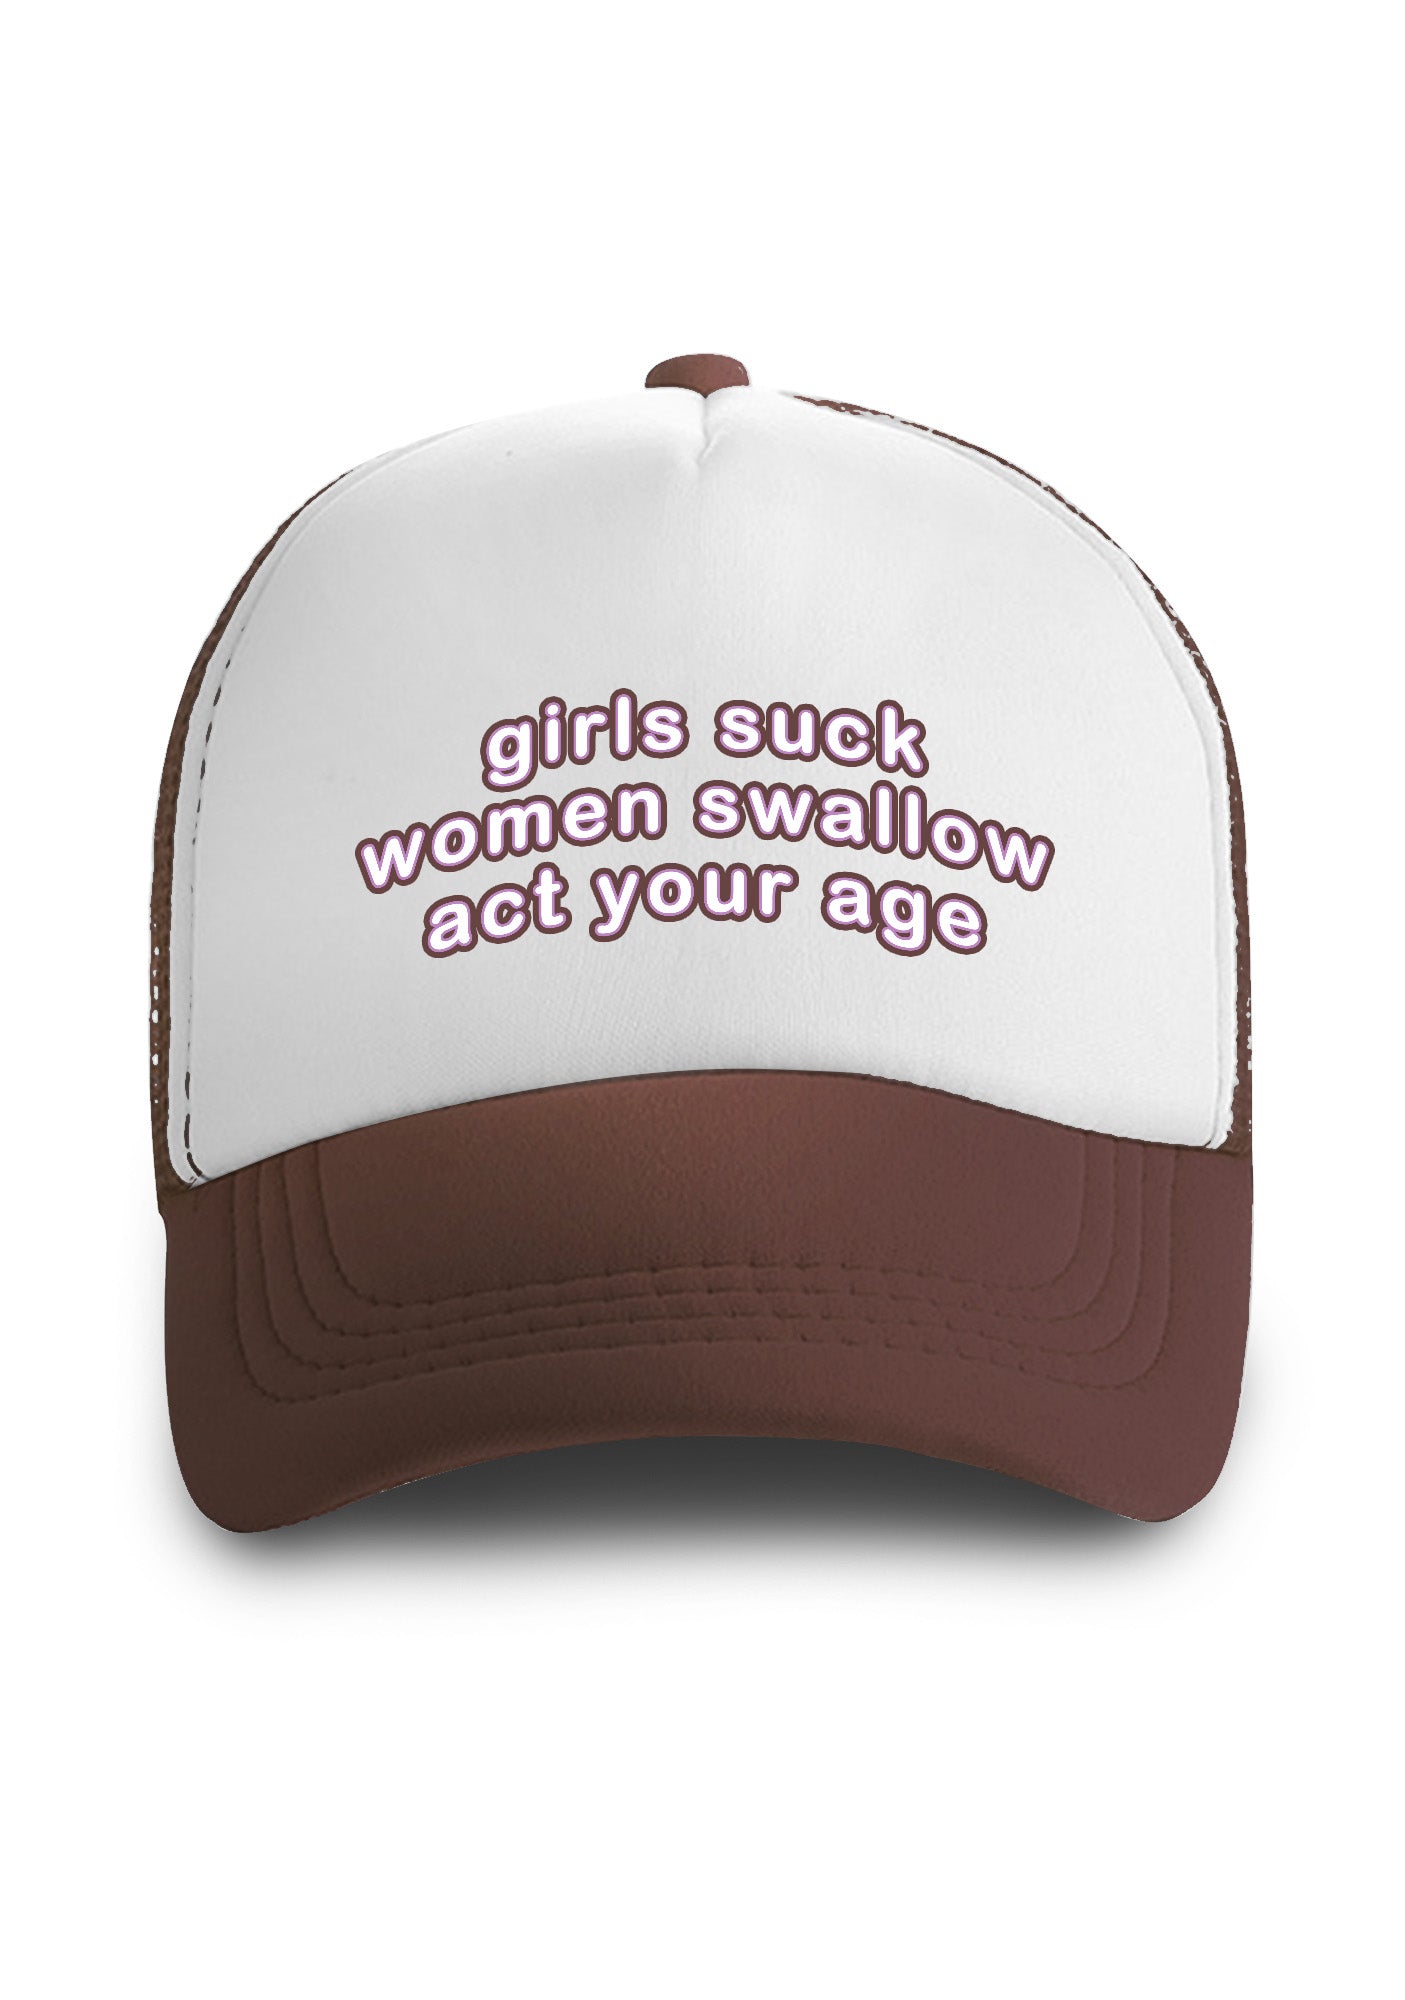 Women Swallow Act Your Age Trucker Hat